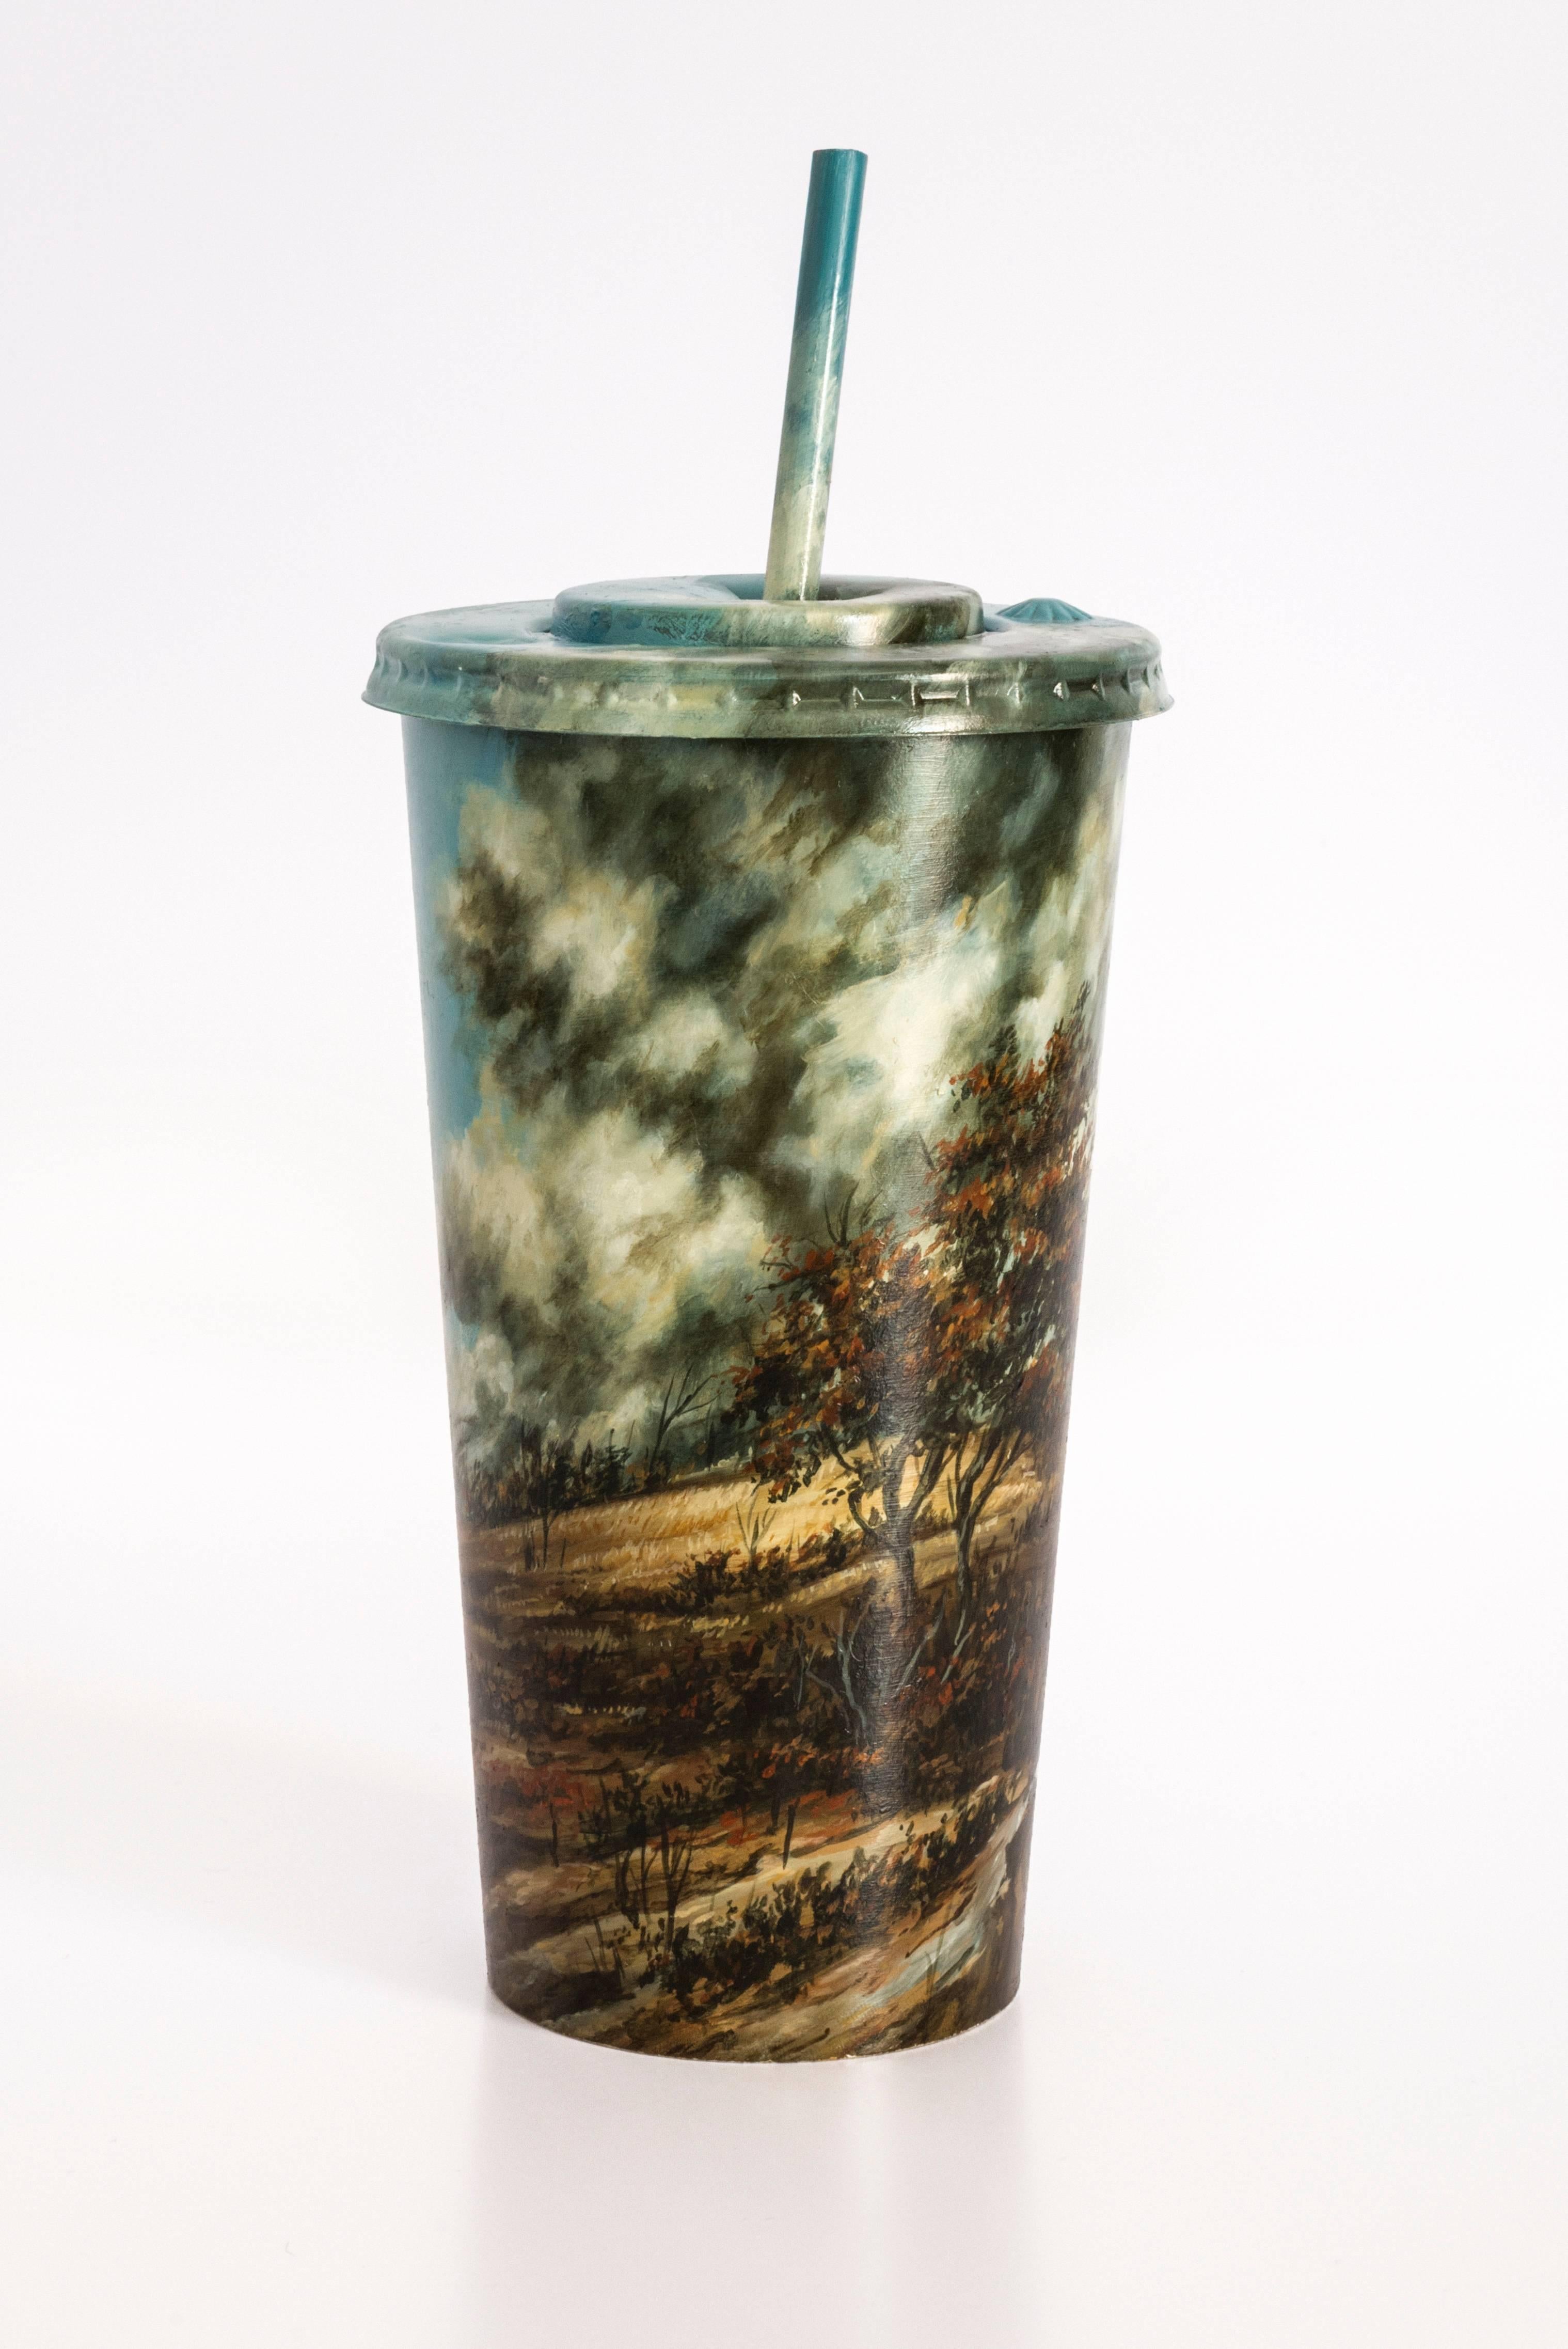 Untitled #1 from 'Biotá' series by Armando de la Garza
15 H x 9 cm. D
Oil Paint on Cardboard Cup
One of a kind 
Signed on base by the artist
__________________________________________________________________
The 'Biotá' series is a project in which,